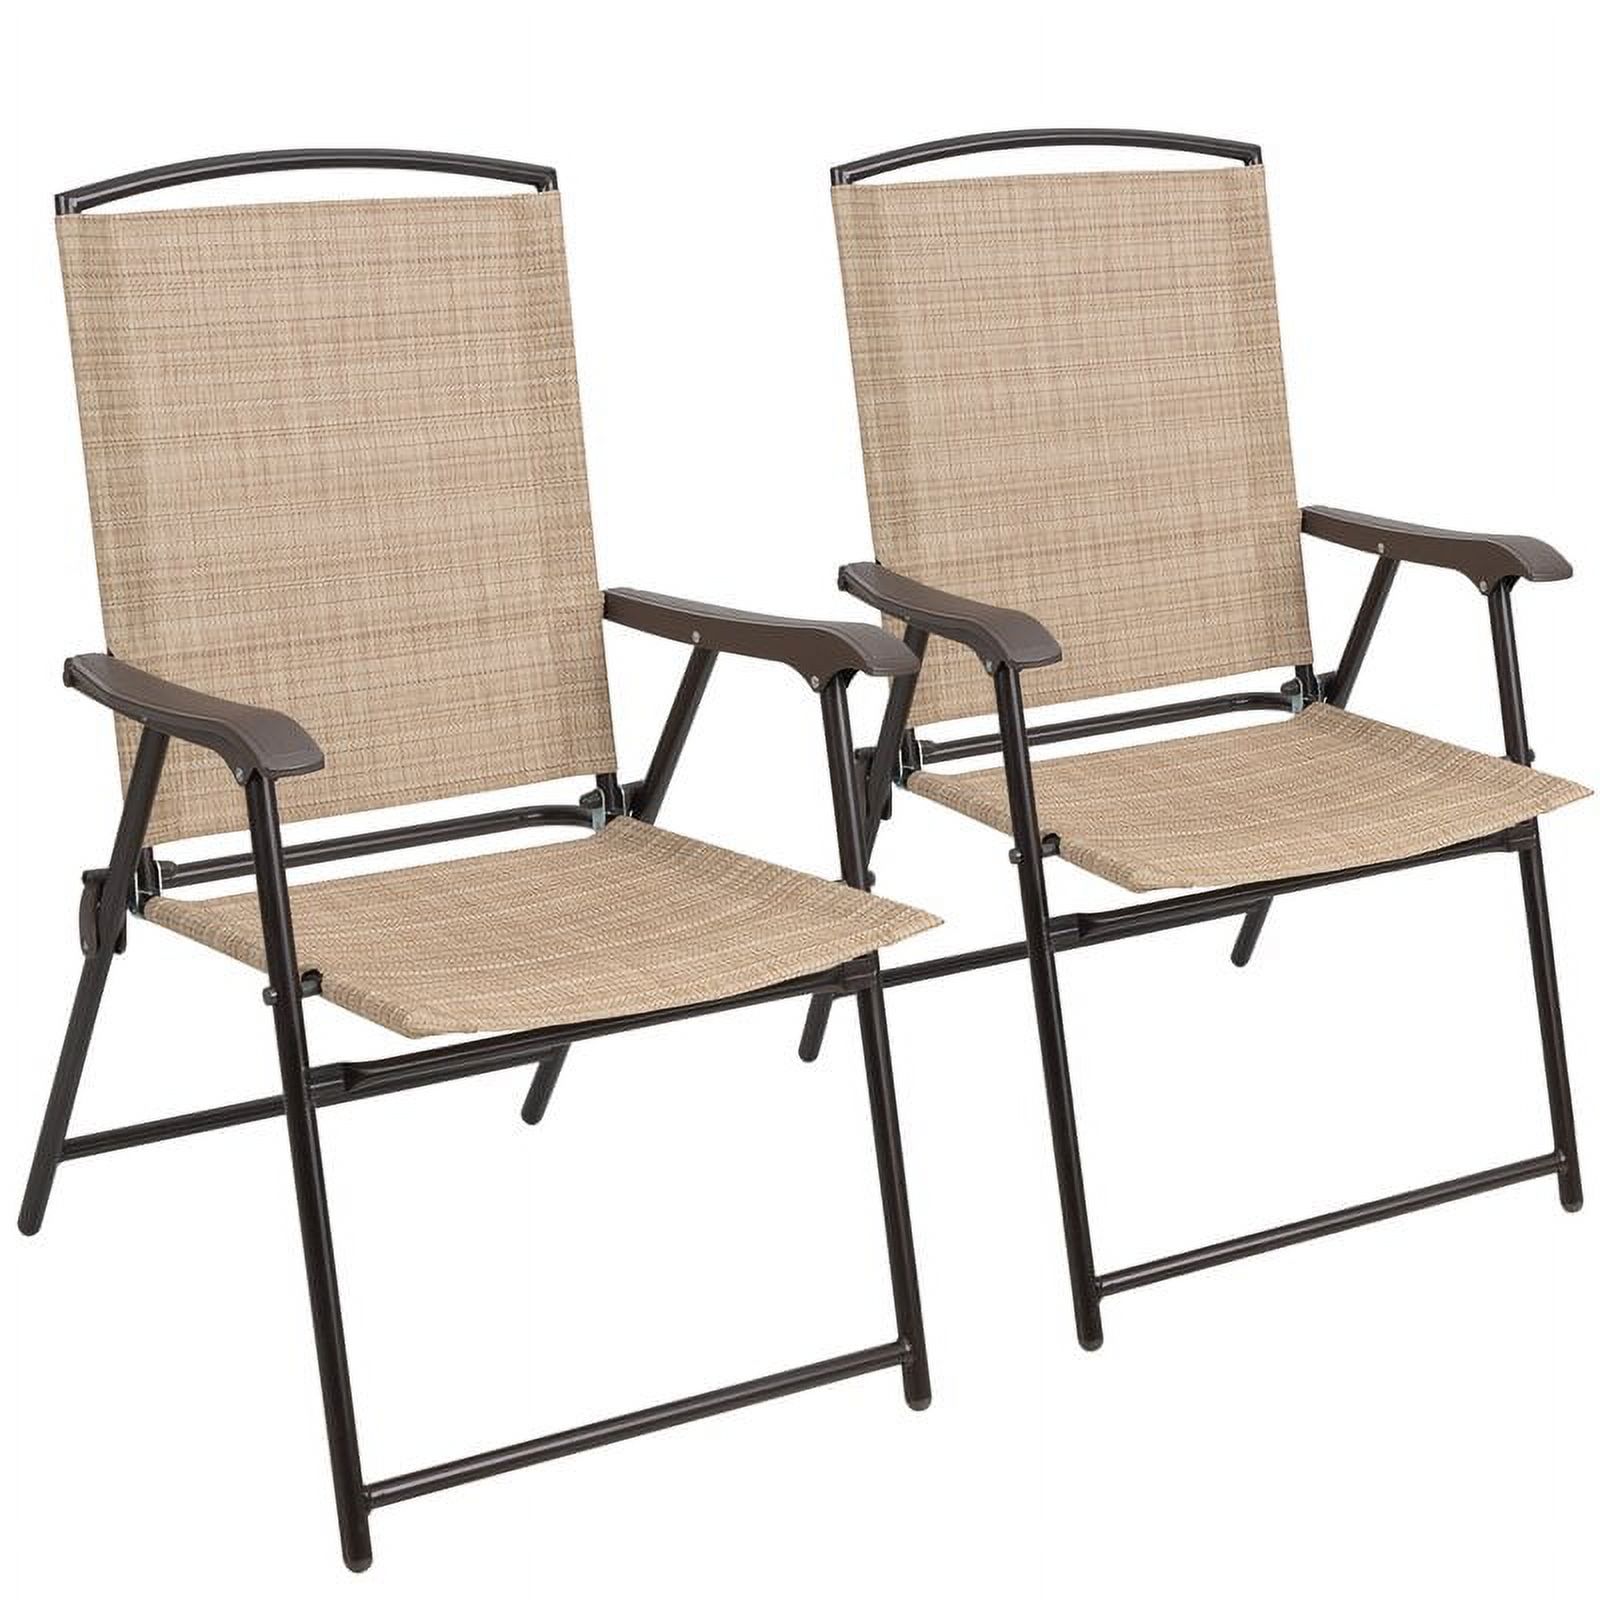 Devoko 2 Pieces Patio Folding Chairs Outdoor Chairs Textilene Furniture Chair Set, Beige - image 1 of 7